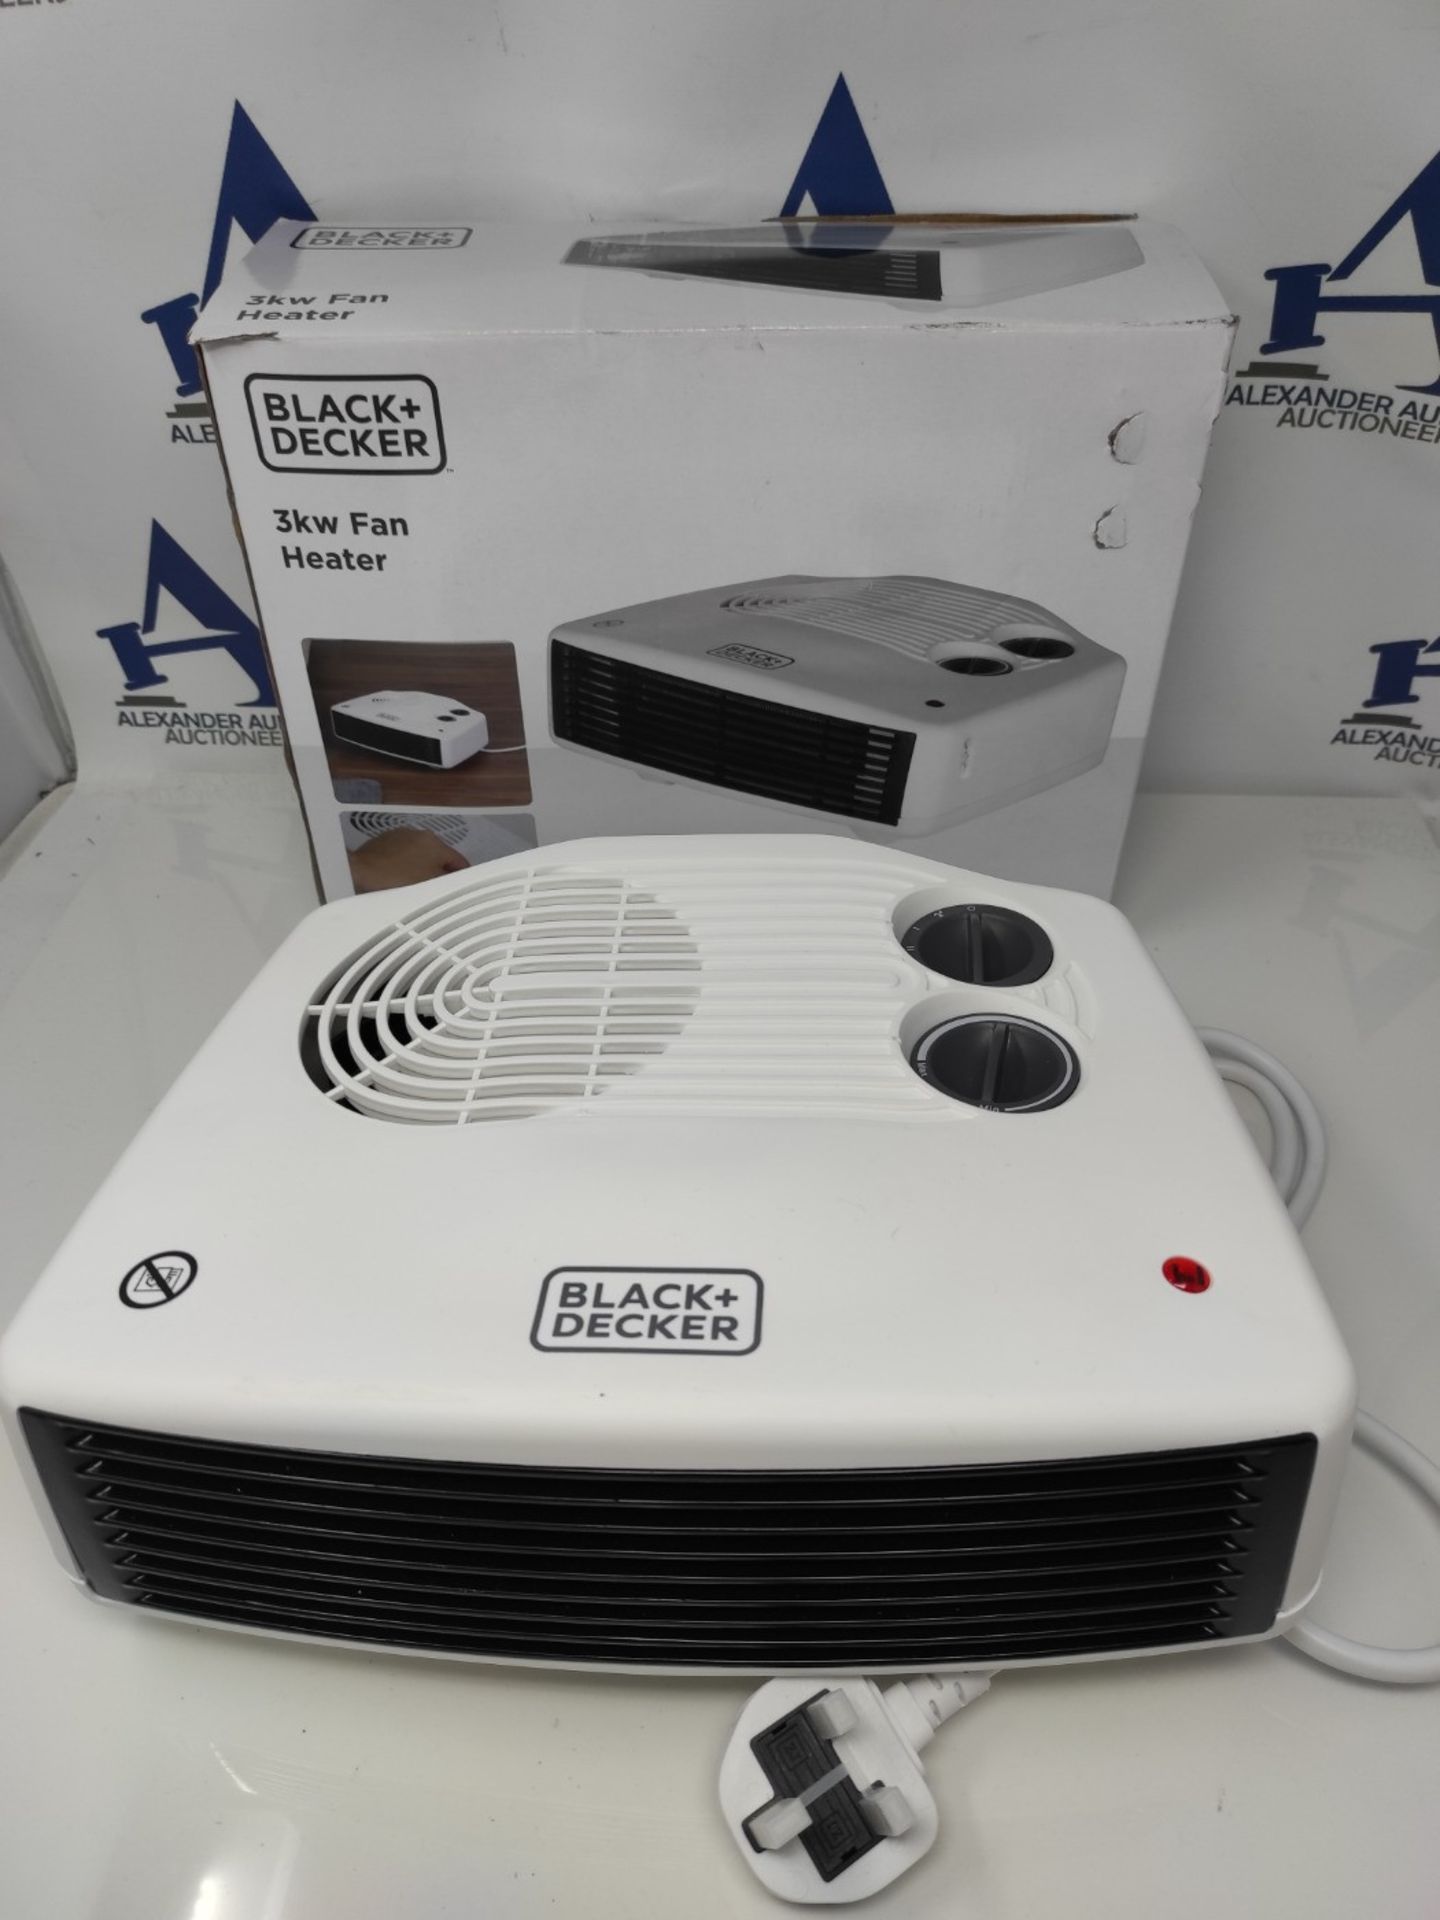 Black+Decker BXSH37006GB Fan Heater with Climate Control, 3kW, White - Image 2 of 2